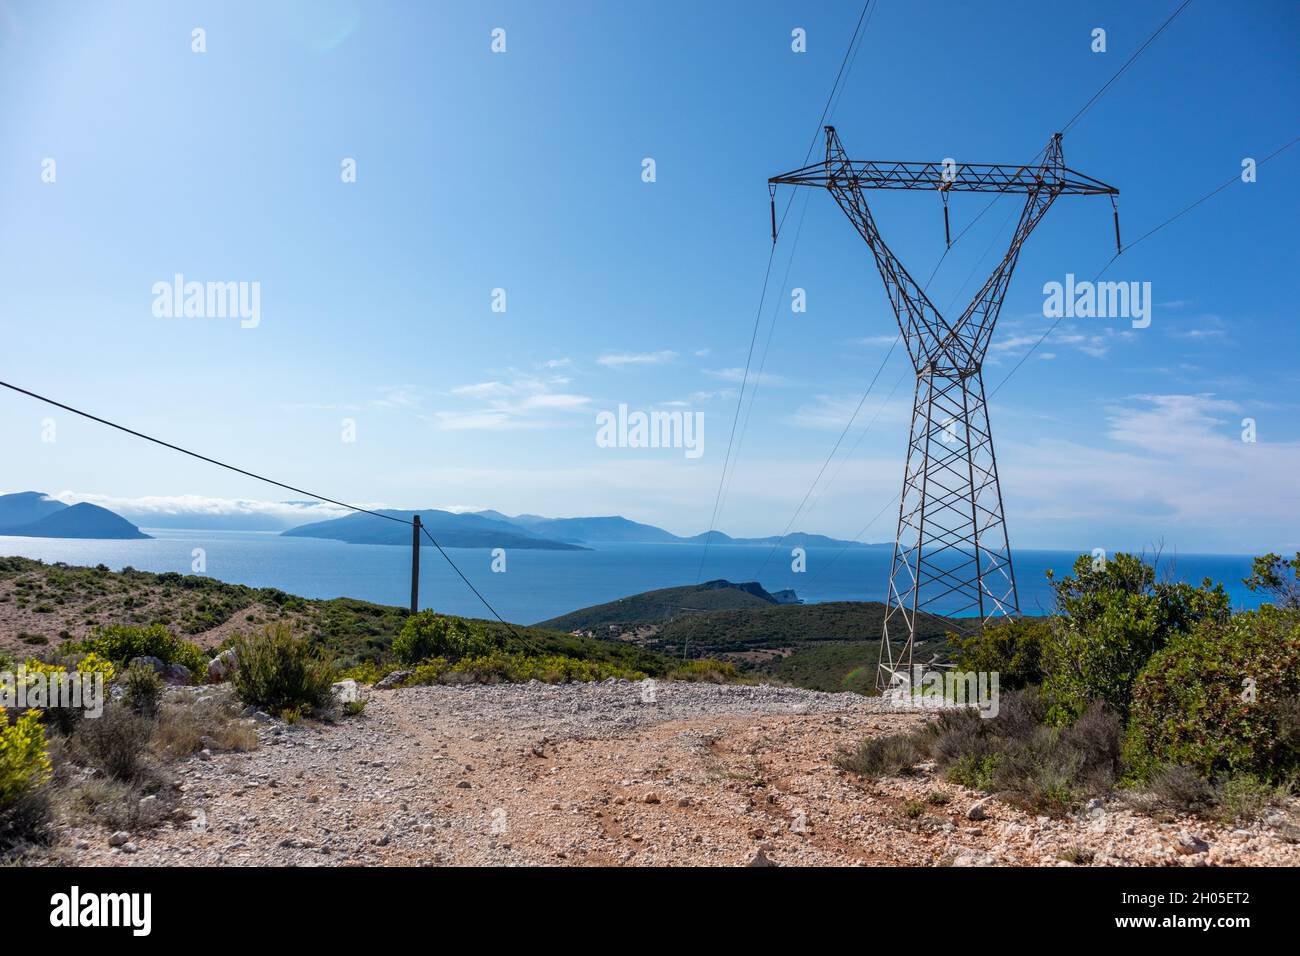 Panoramic landscape of Lefkada island hills from dirt road. Greece with green woods, blue sky and electrical support line. Summer travel Stock Photo